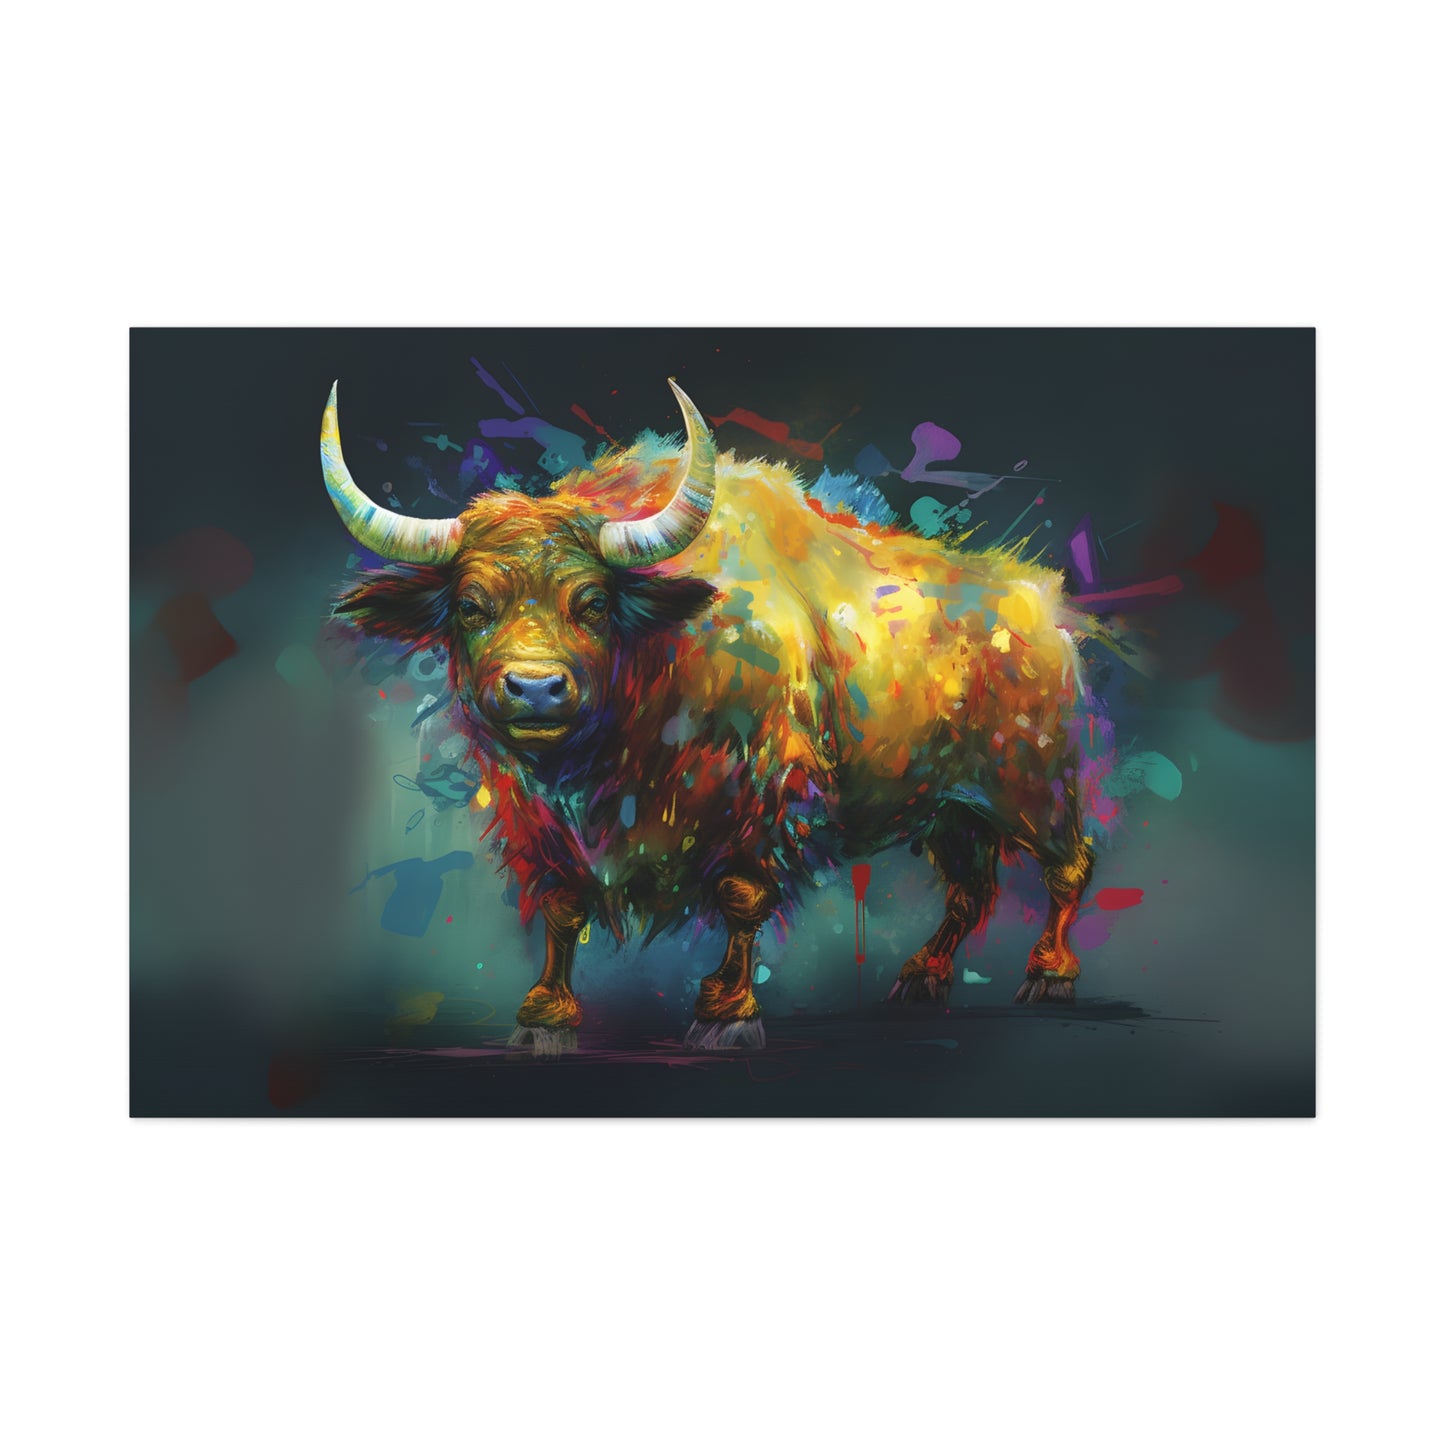 Year Of The Ox (Chinese Zodiac)